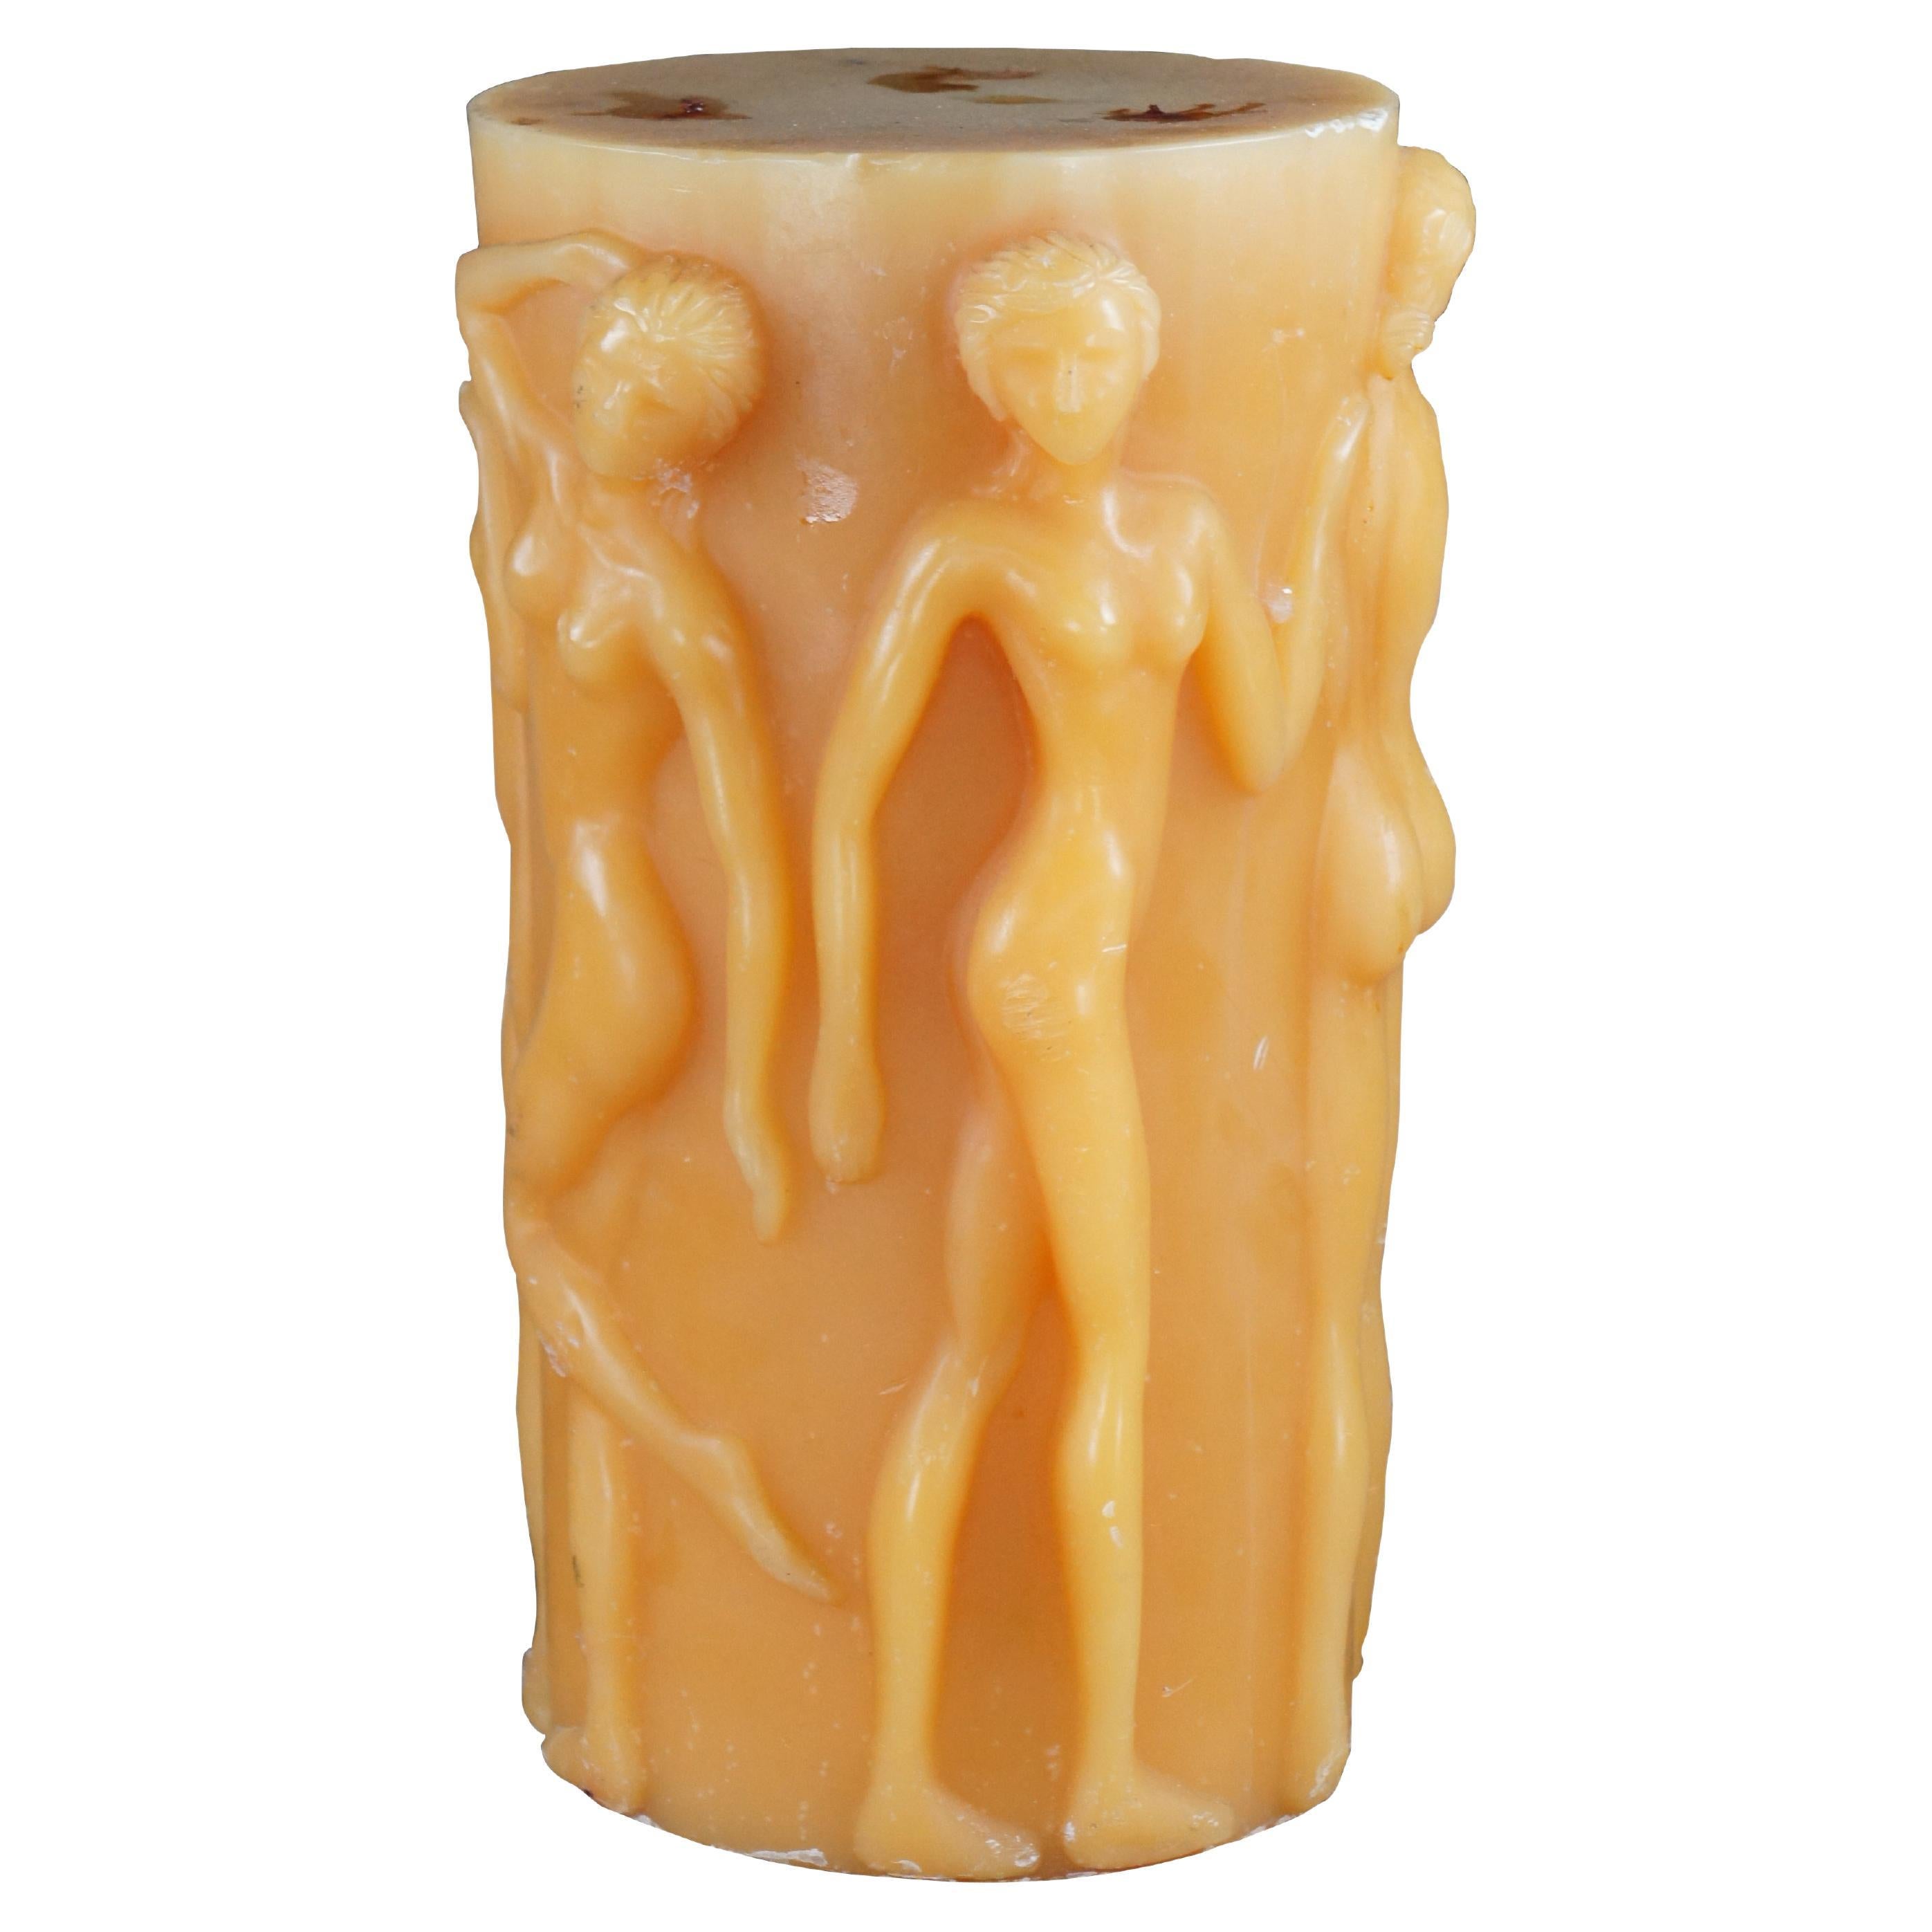 Intira Candle Factory Lalique 'Bacchantes' Nude Figural Large Wax Candle 15"